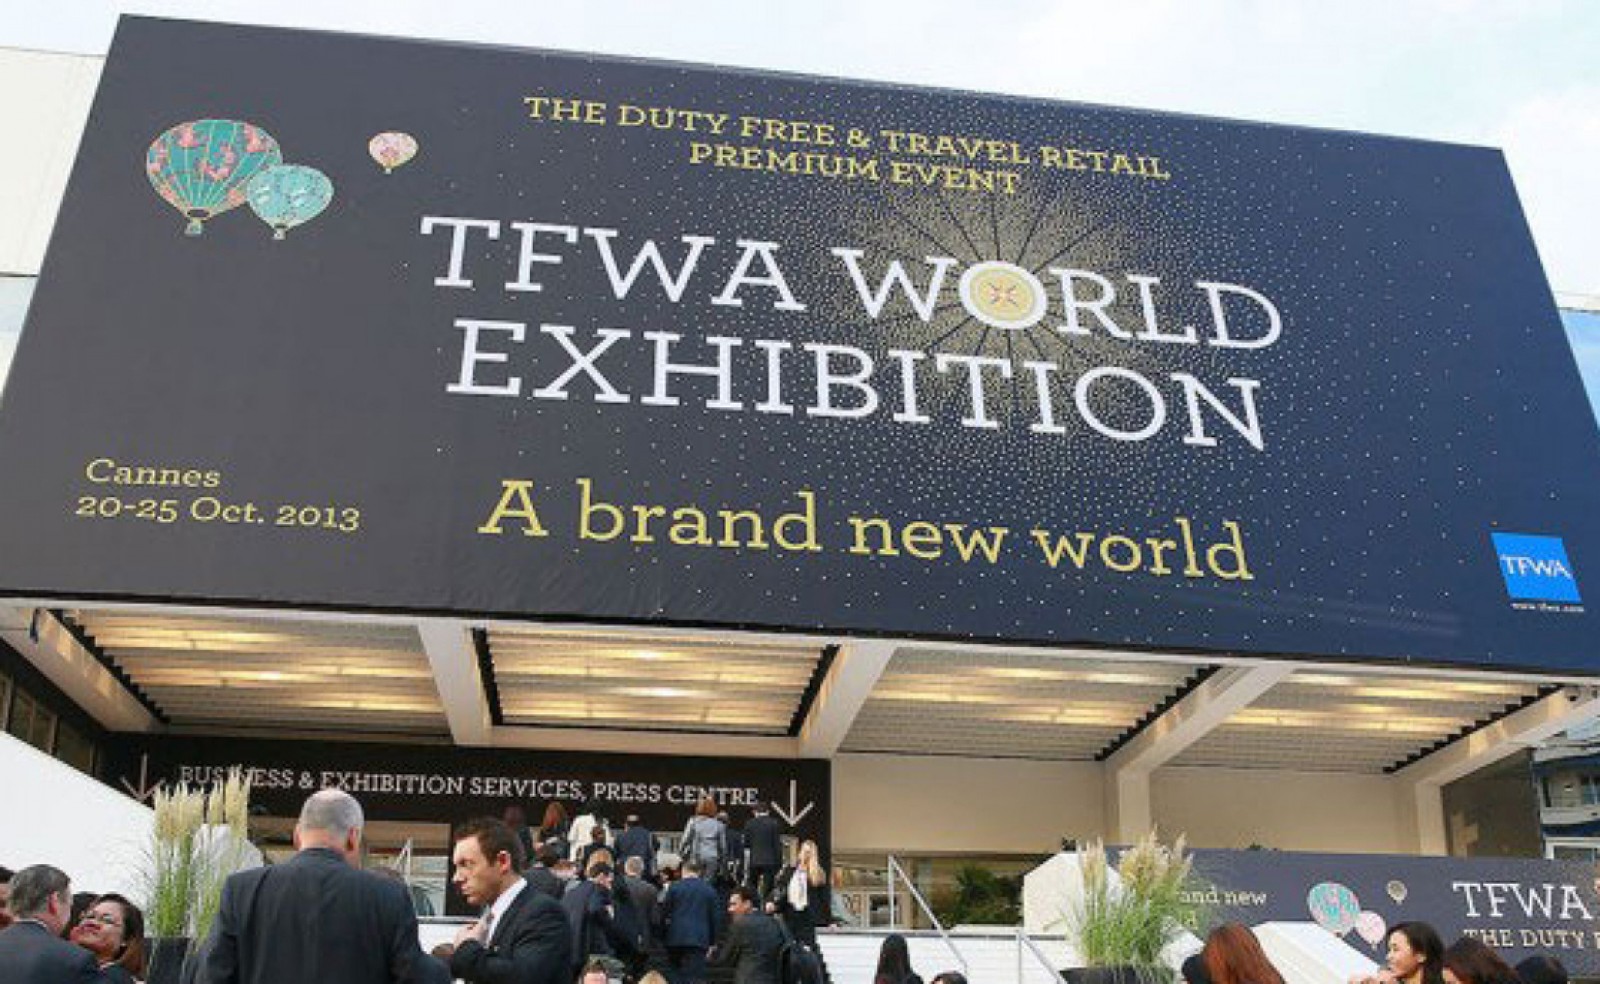 Private Chauffeur for Tax Free World Exhibition in Cannes - Premium Vehicles & Services - Reactivity 24/7 - Ruby Services - Car Rental with Driver for Tax Free World Exhibition in Cannes